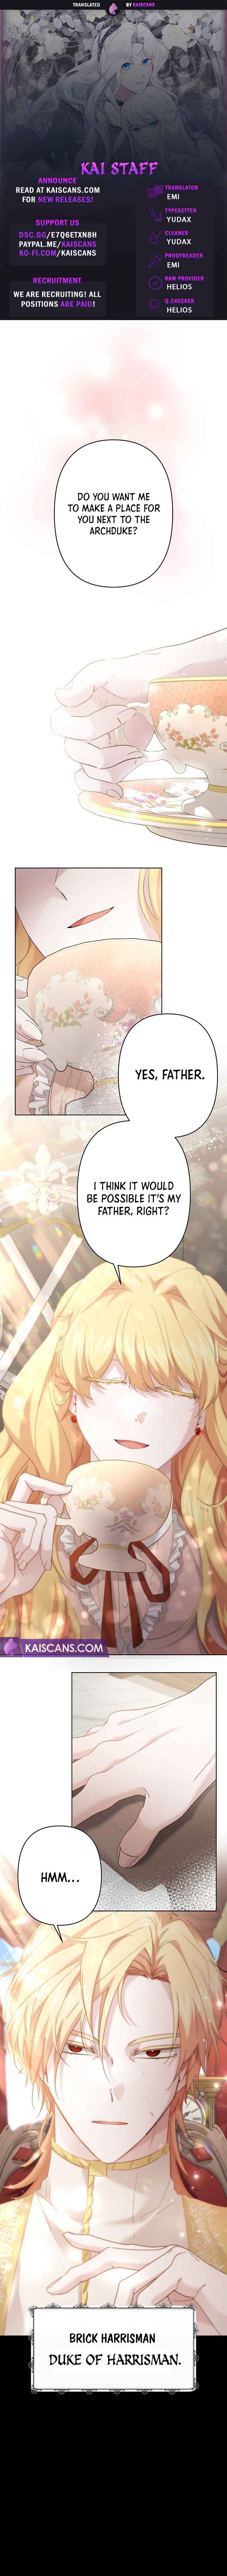 I Need to Raise My Sister Properly chapter 30